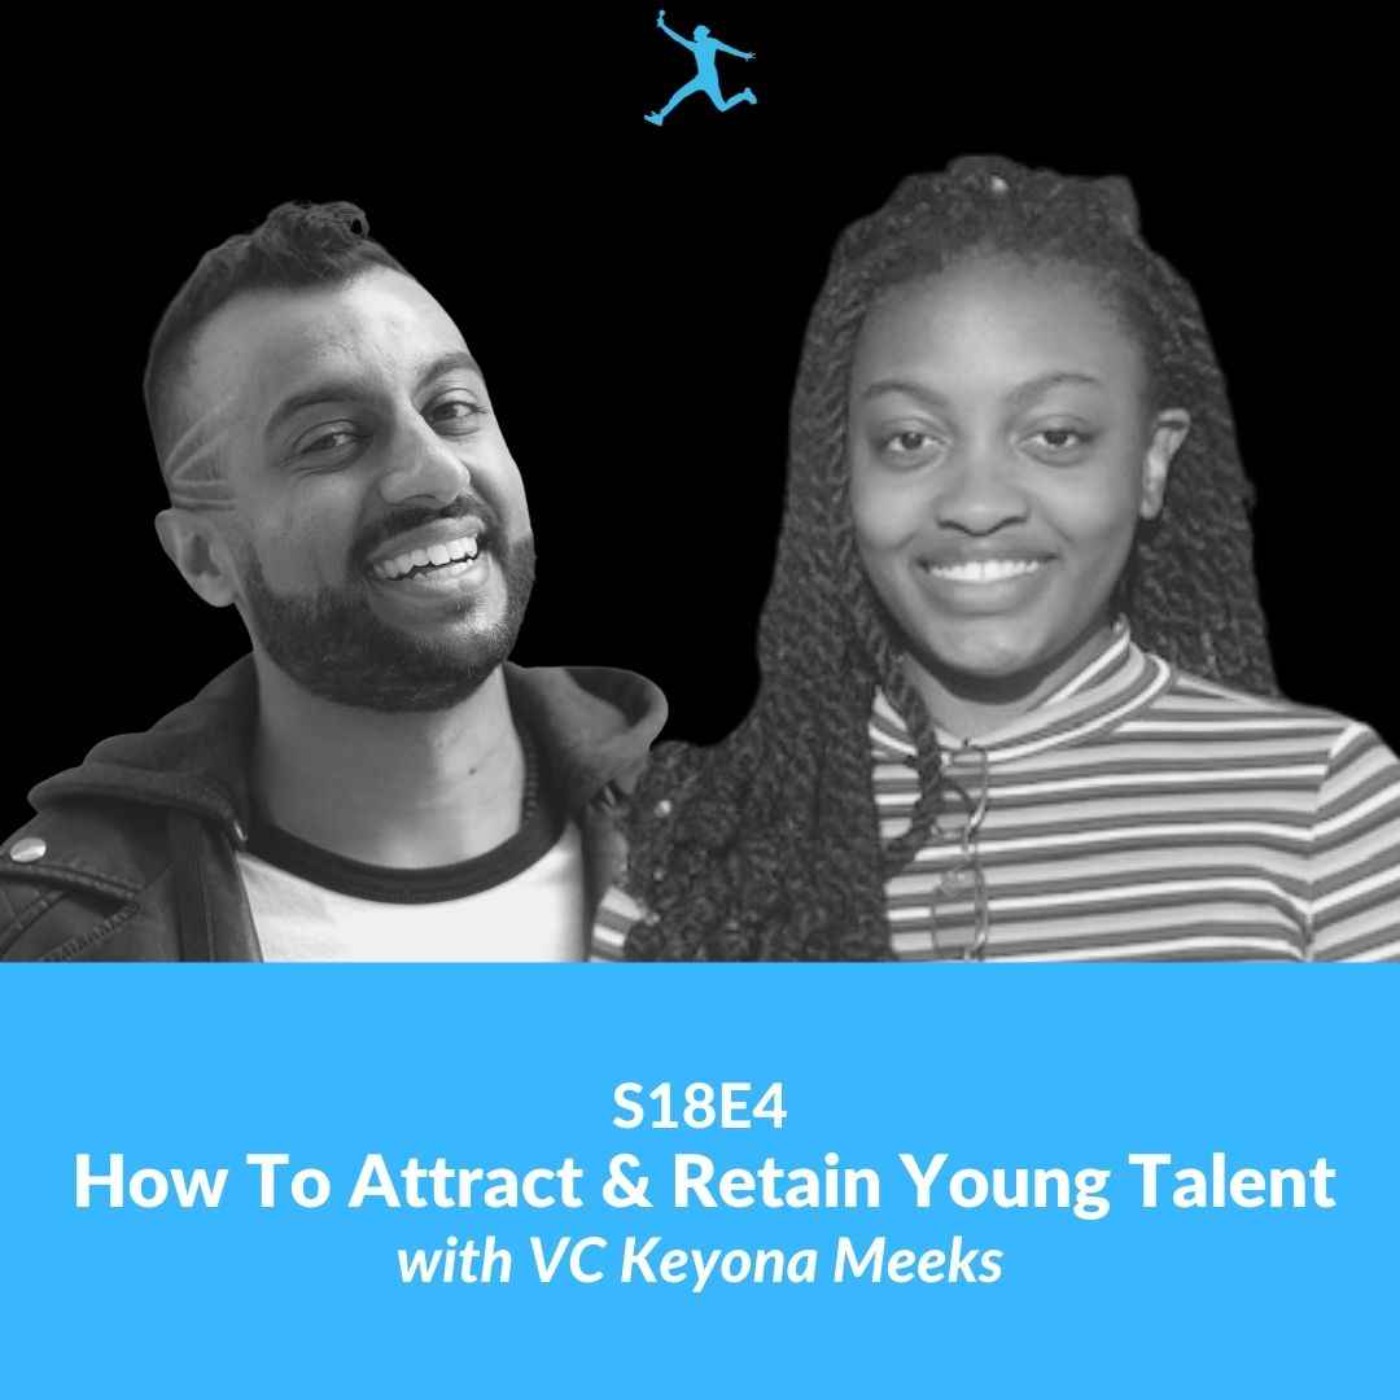 S18E4: How To Attract & Retain Young Talent with VC Keyona Meeks